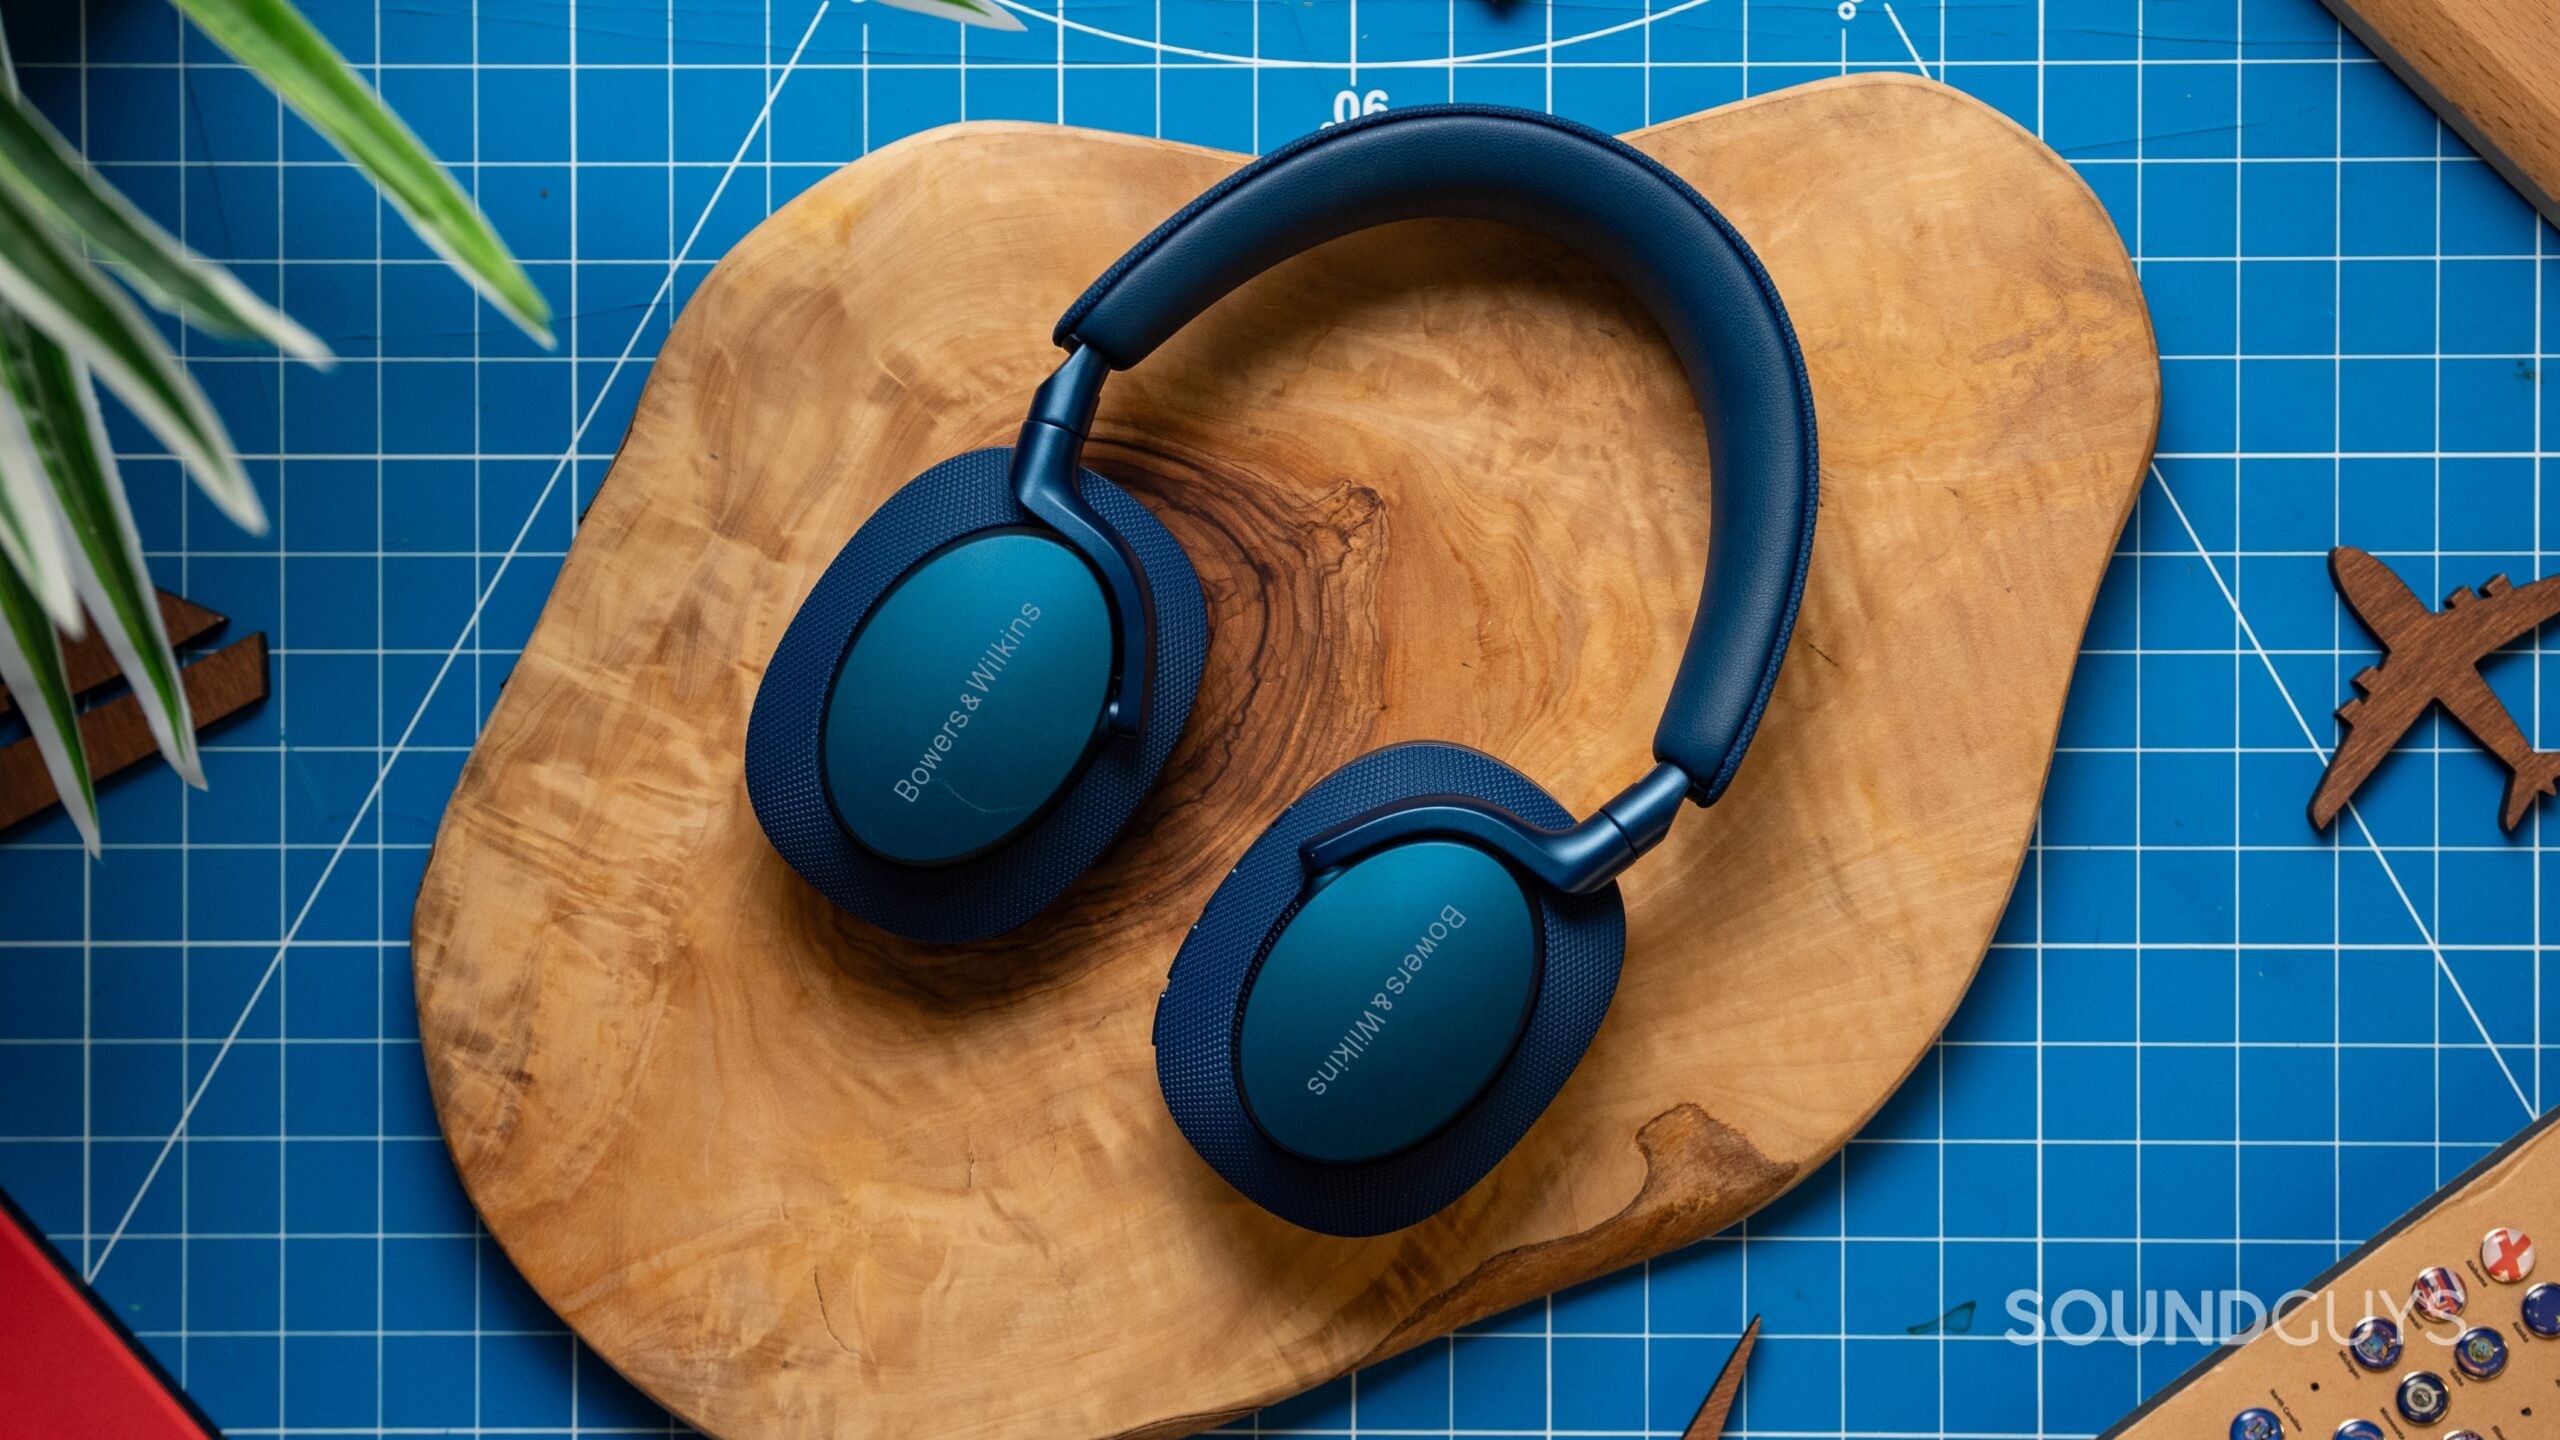 Bowers & Wilkins Px7 S2e headphones debut with improved audio